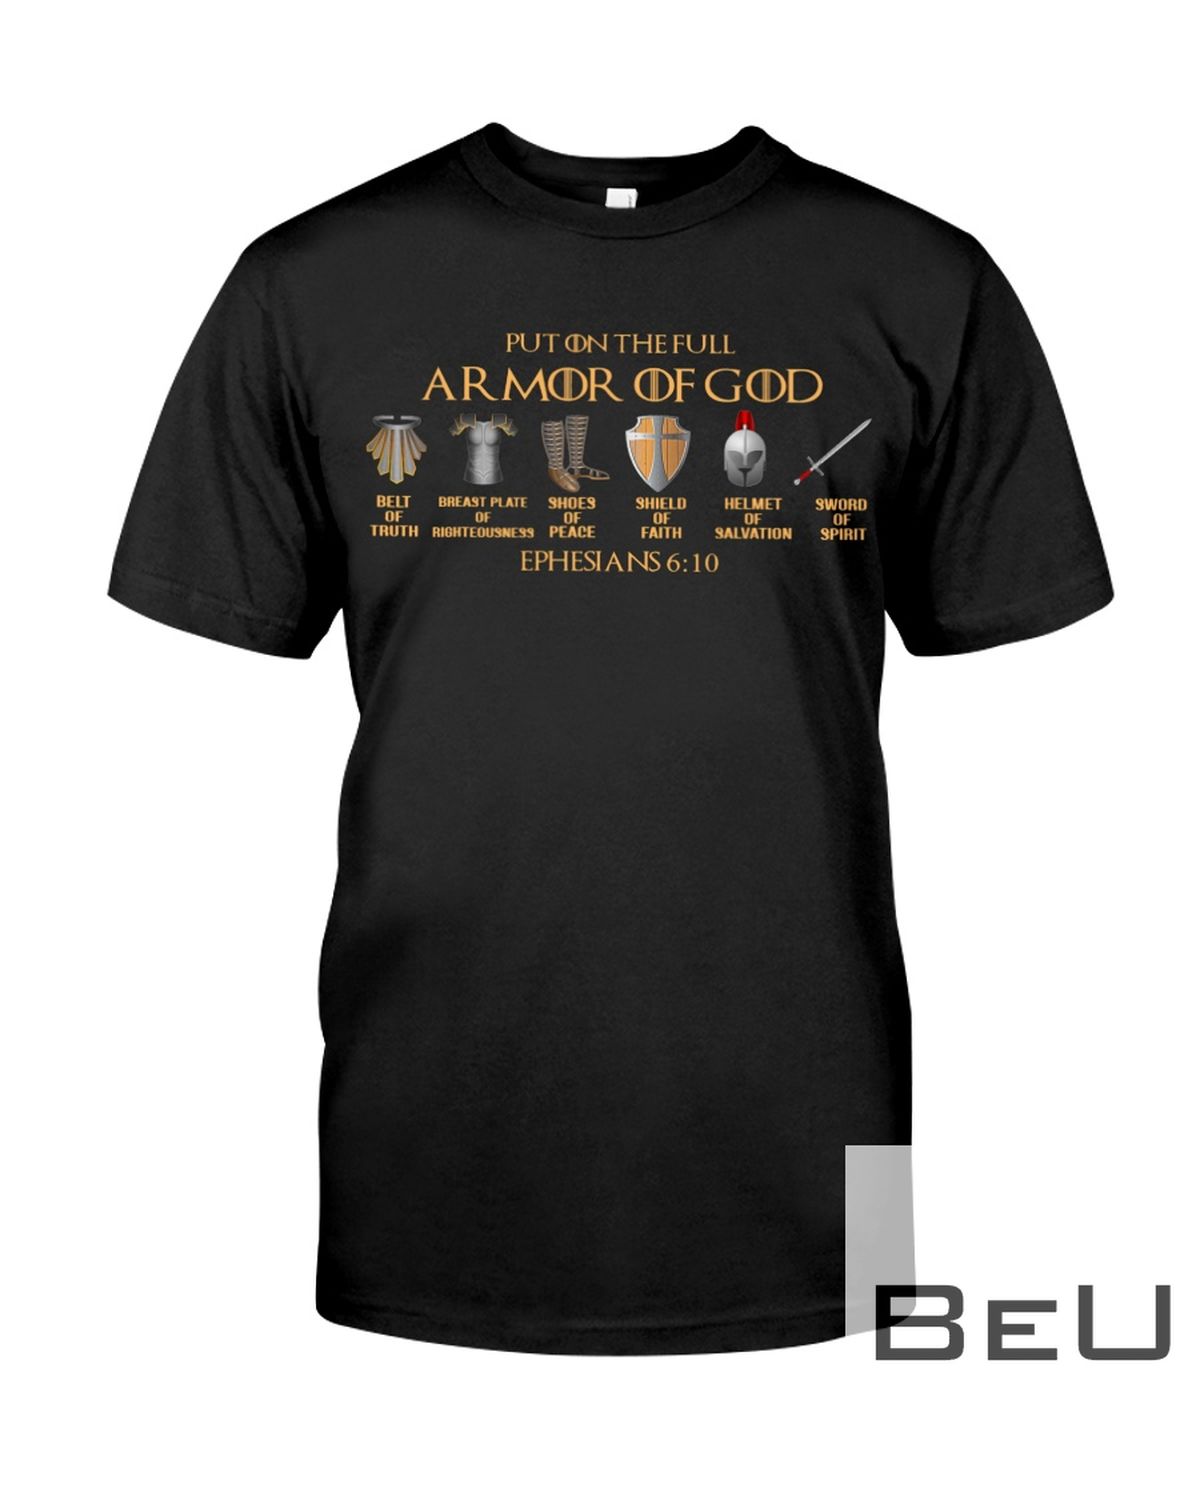 Put On The Full Armor Of God Belt Of Truth Breast Plate Shirt